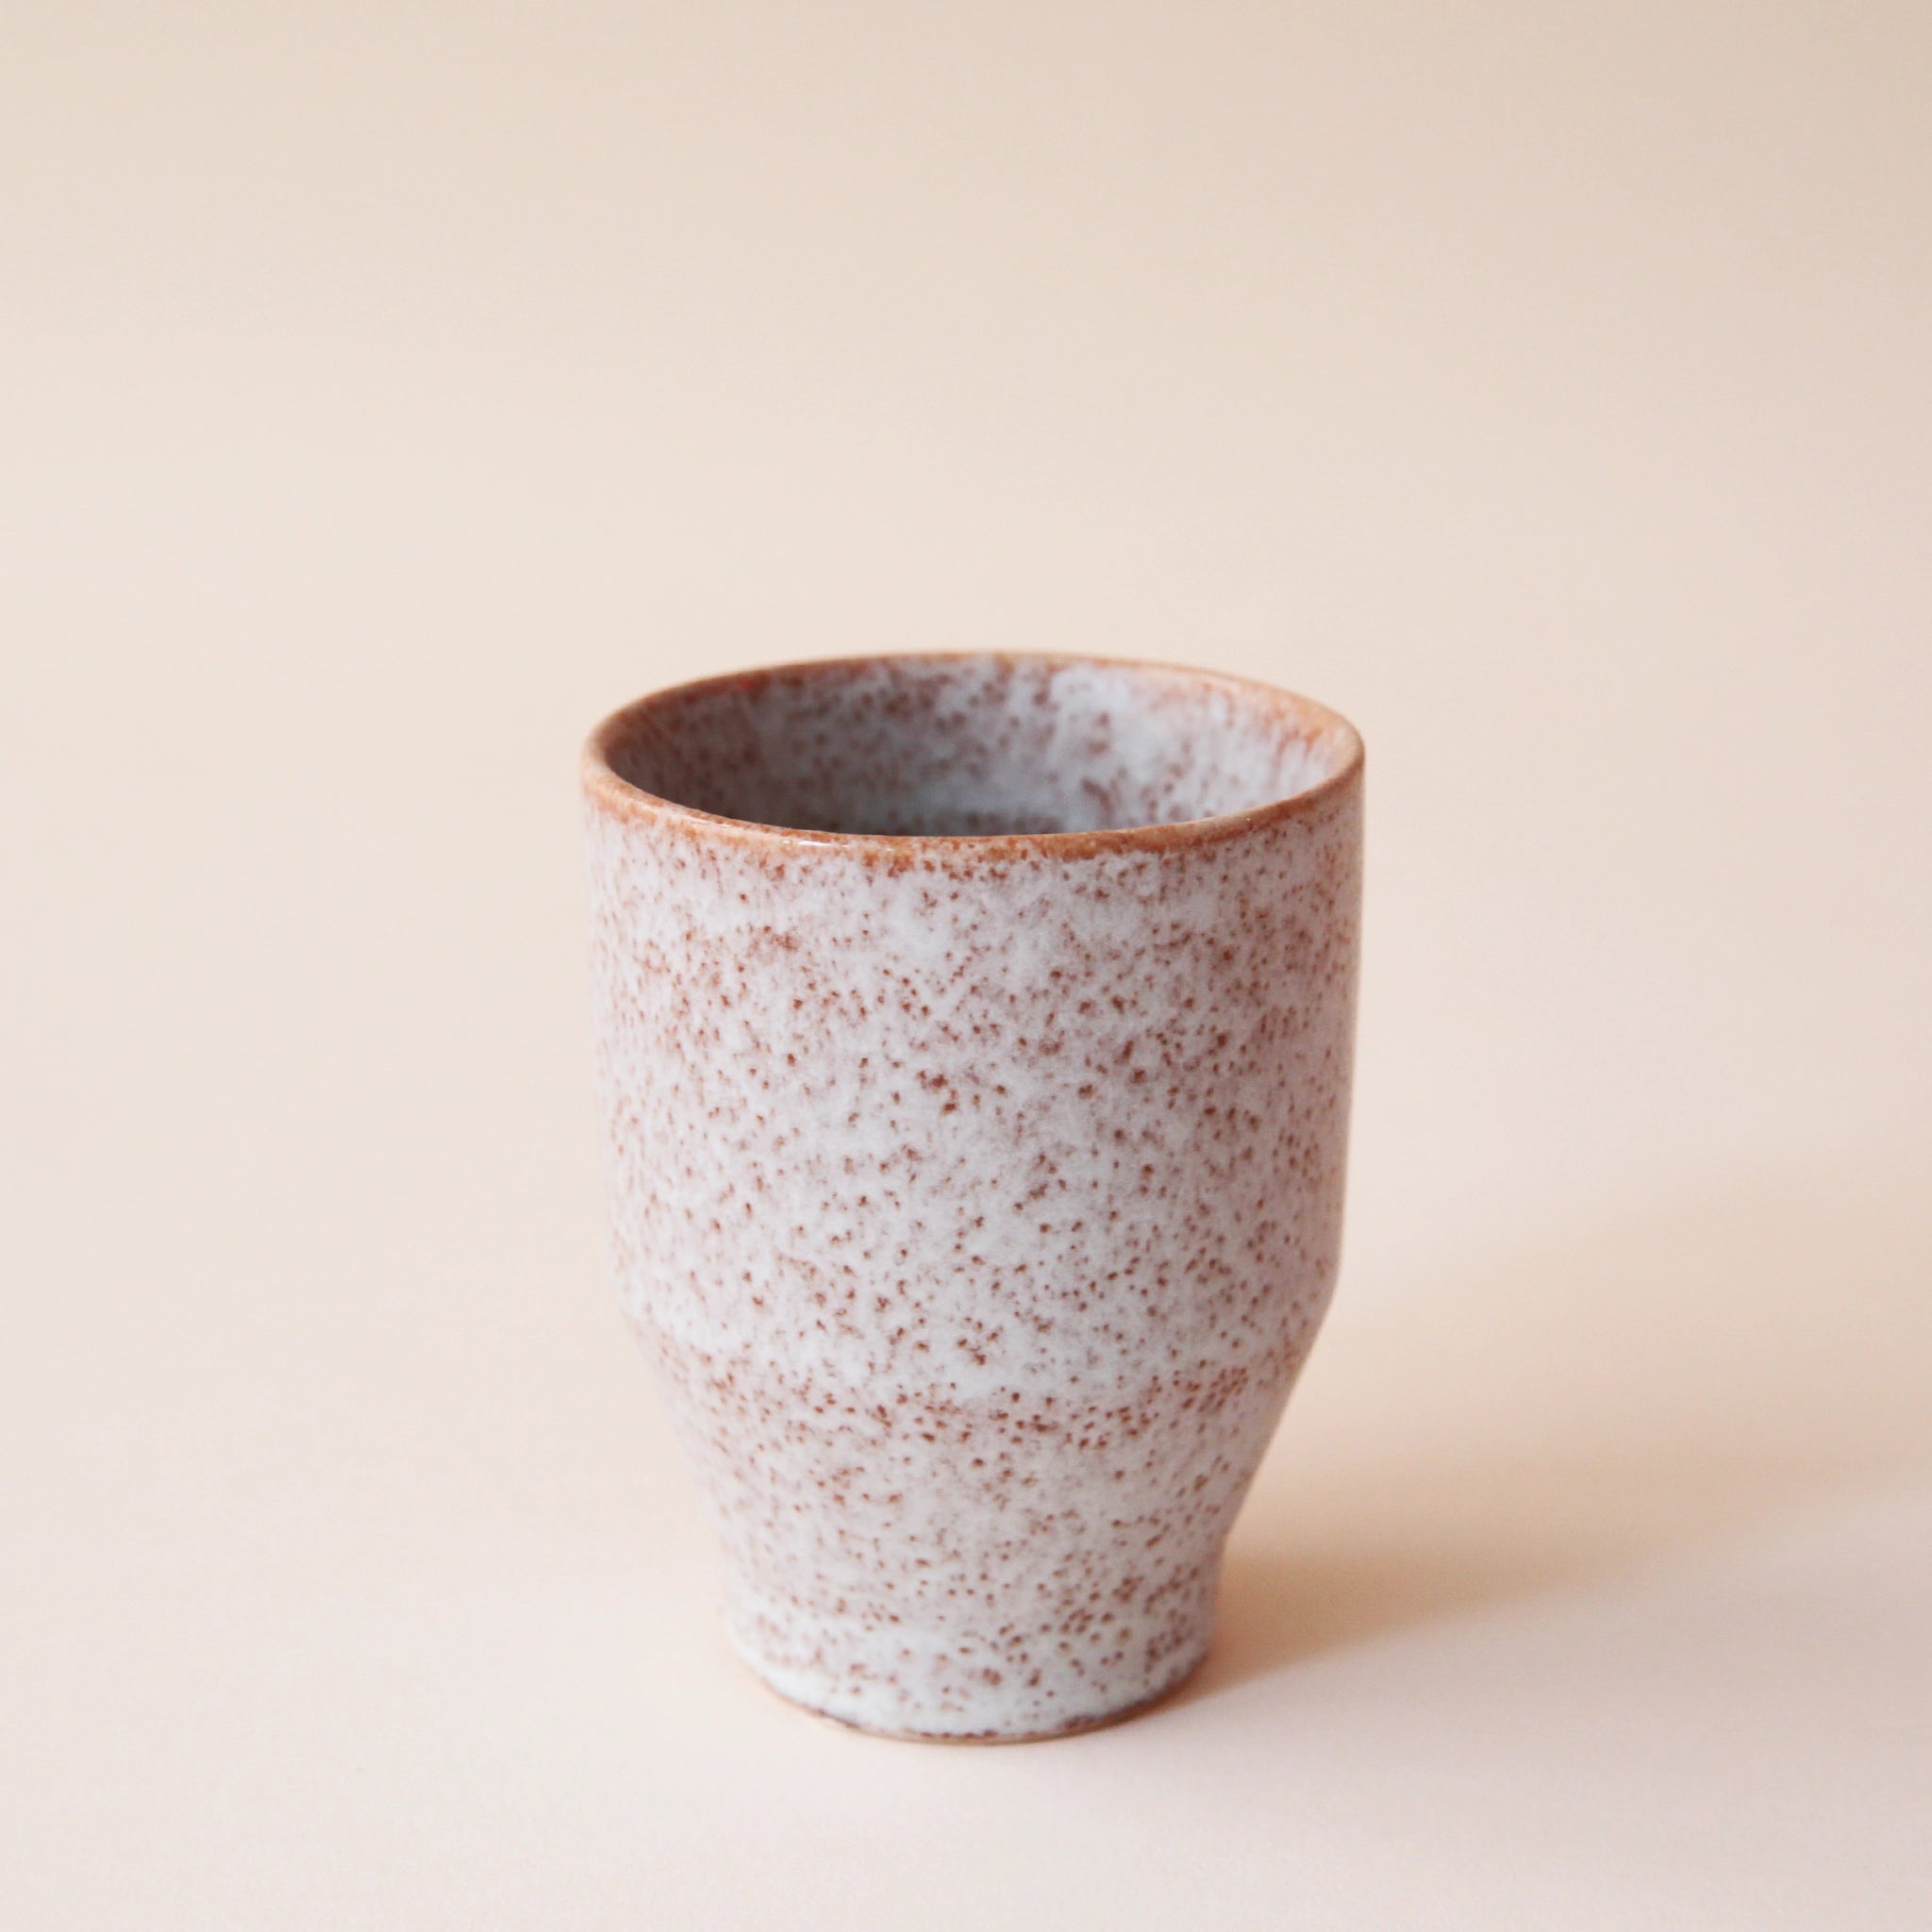 A classic ceramic planter with a speckled white and tan texture.